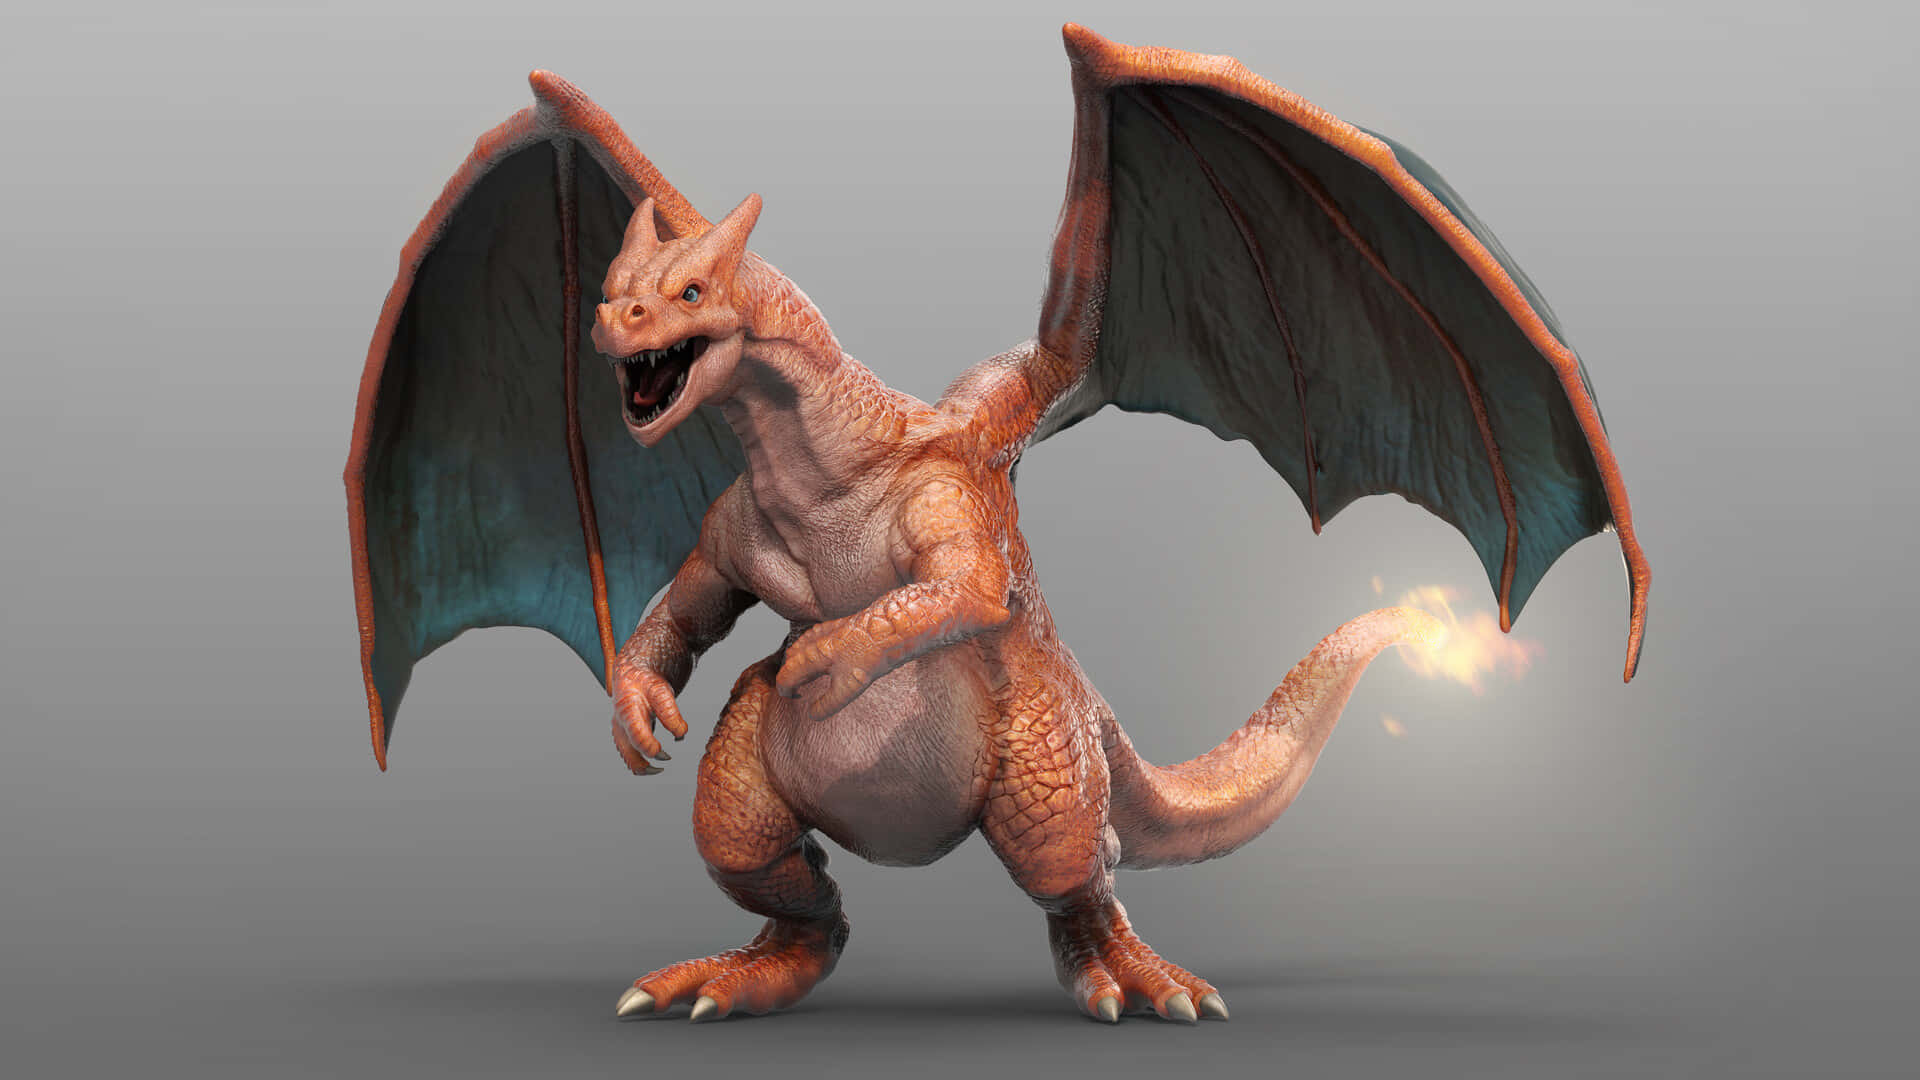 "Breathe Fire With Charizard The Powerful Fire Type Pokemon"